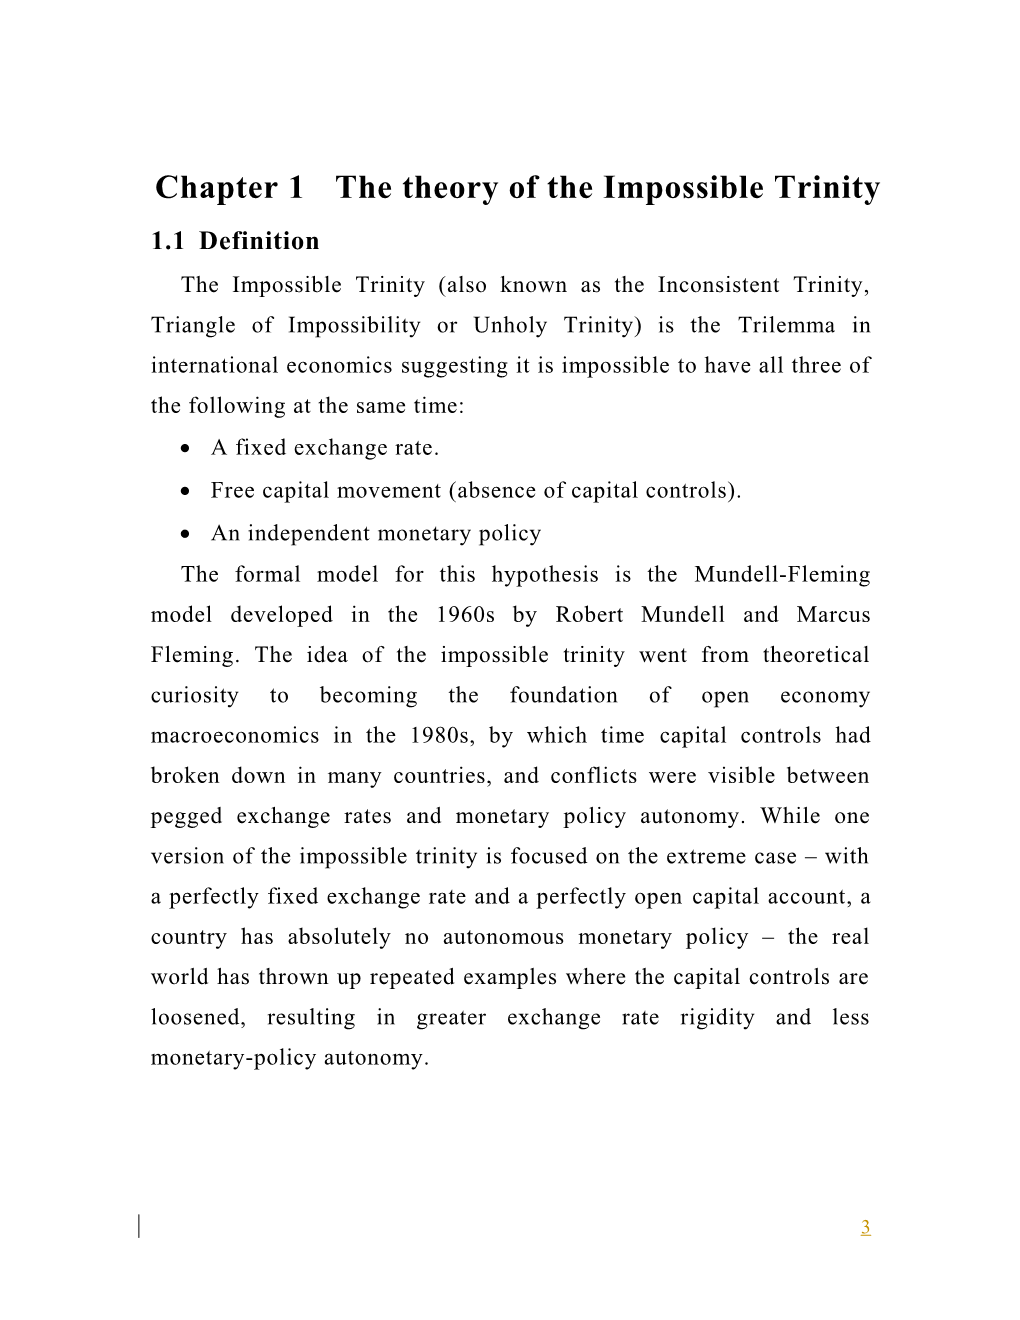 Analyze the Crisis in Thailand Based on the Theory of Impossible Trinity